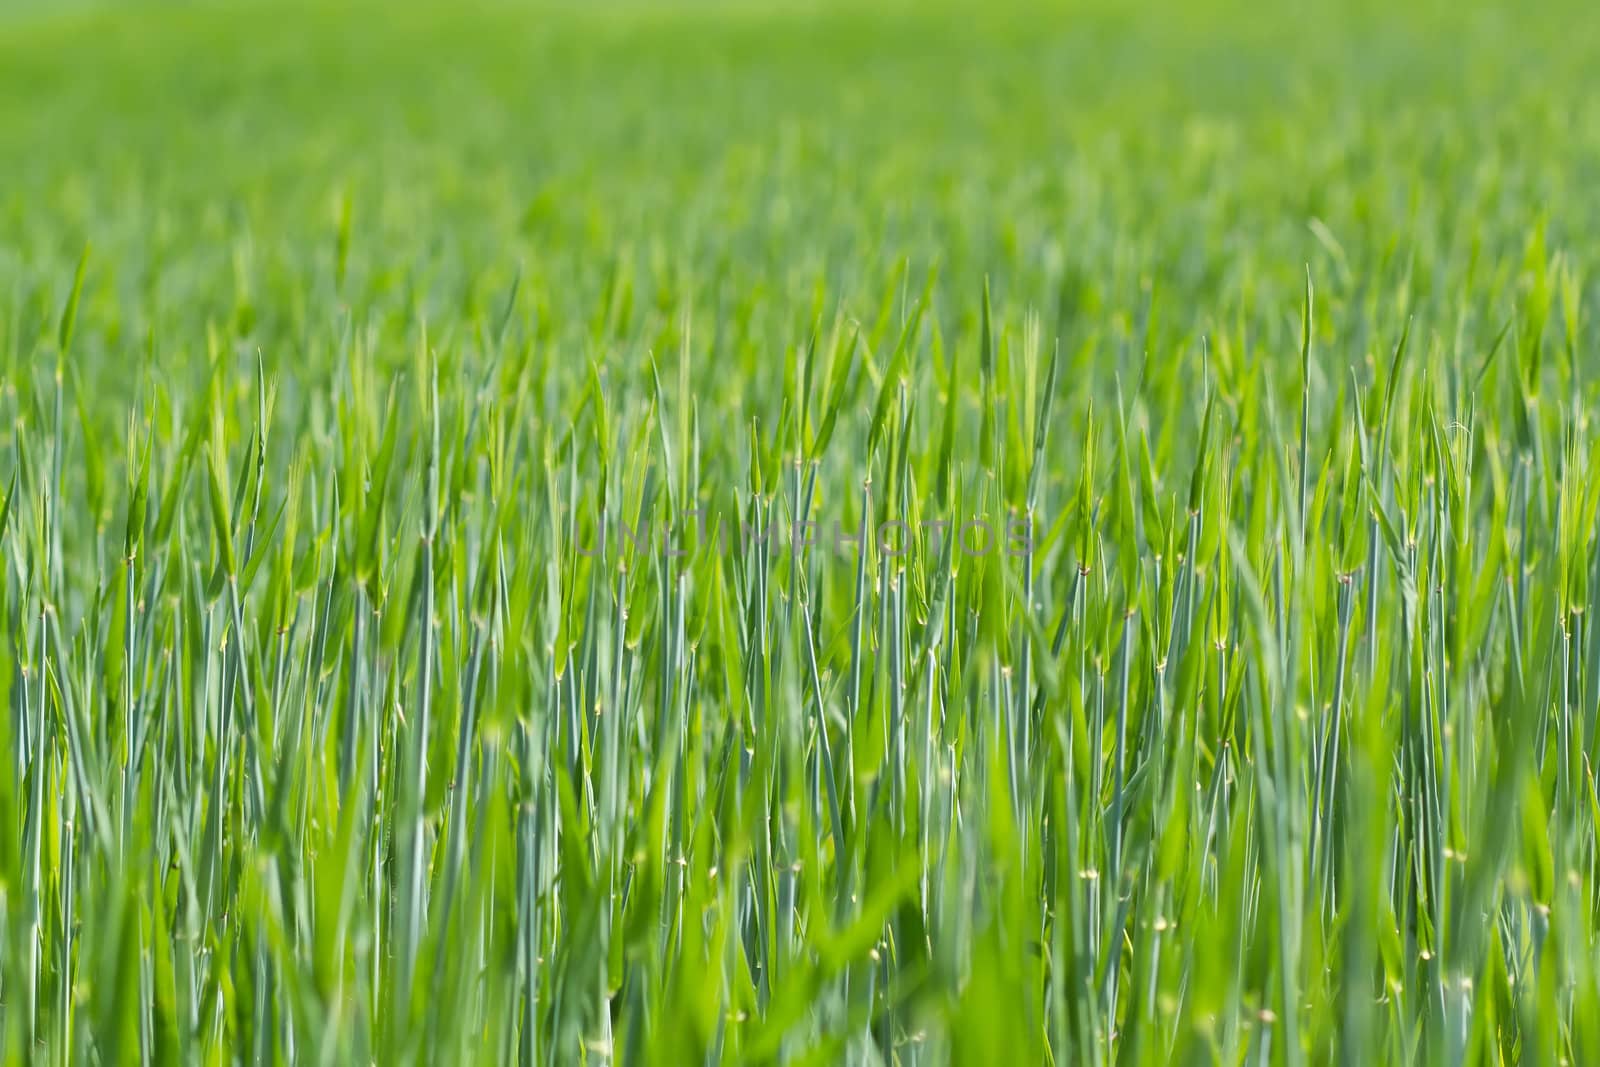 detail of field with green spring grains for background use